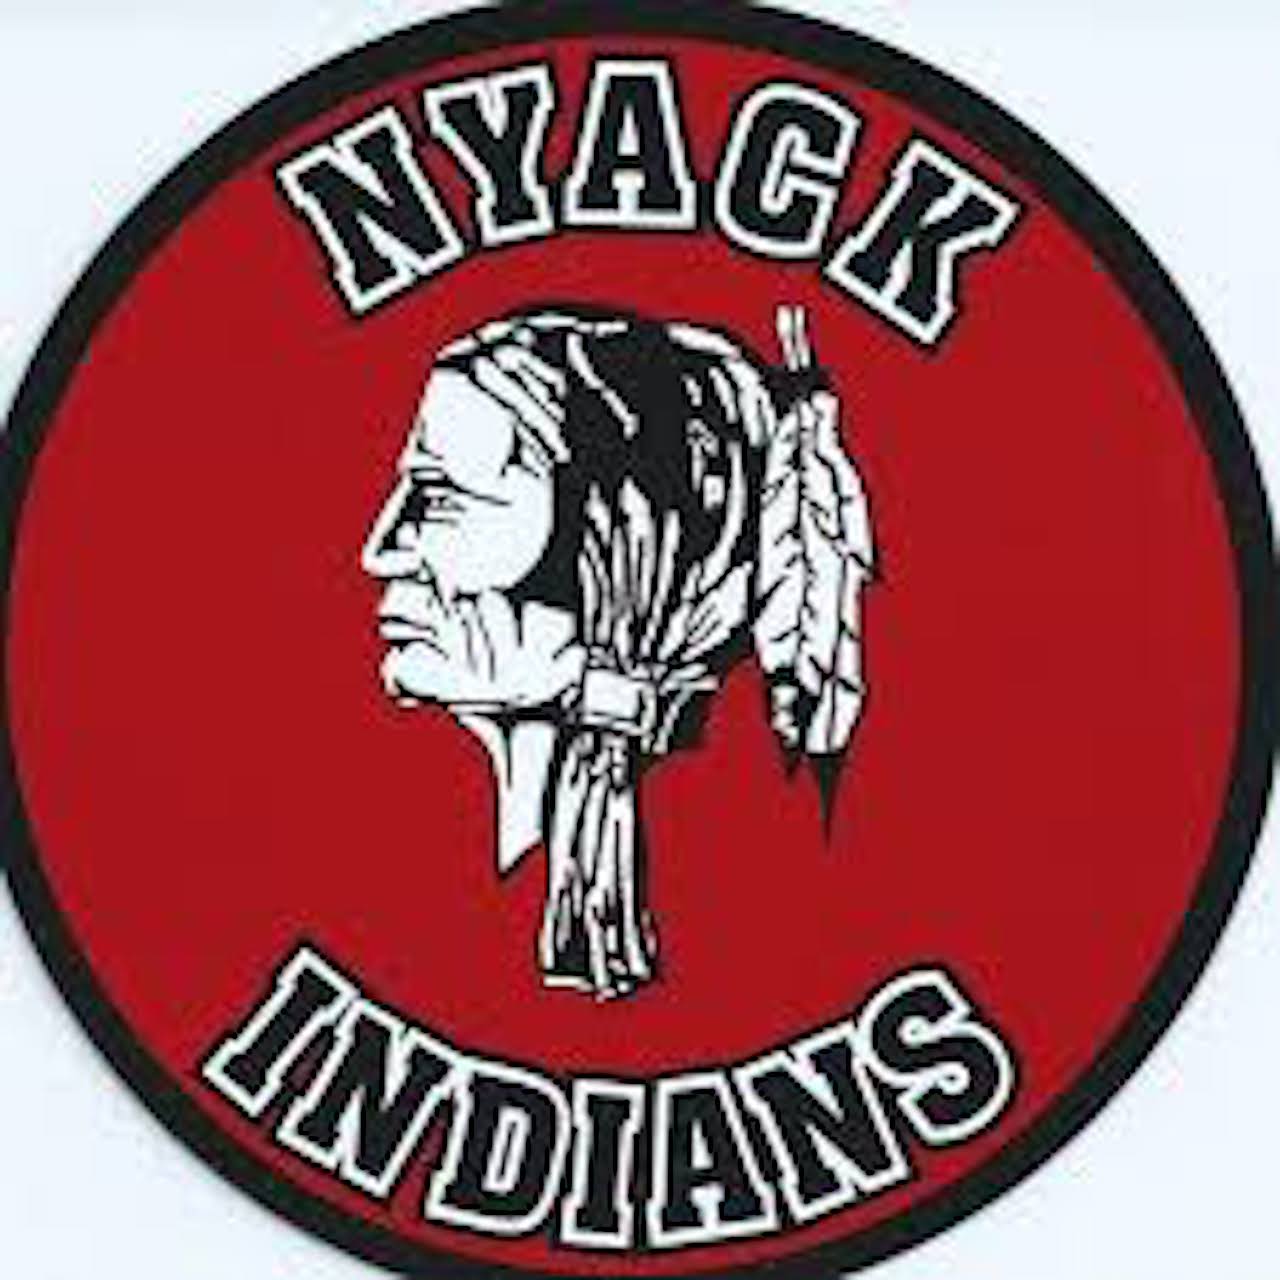 The Nyack School District is moving away from the Indians mascot.